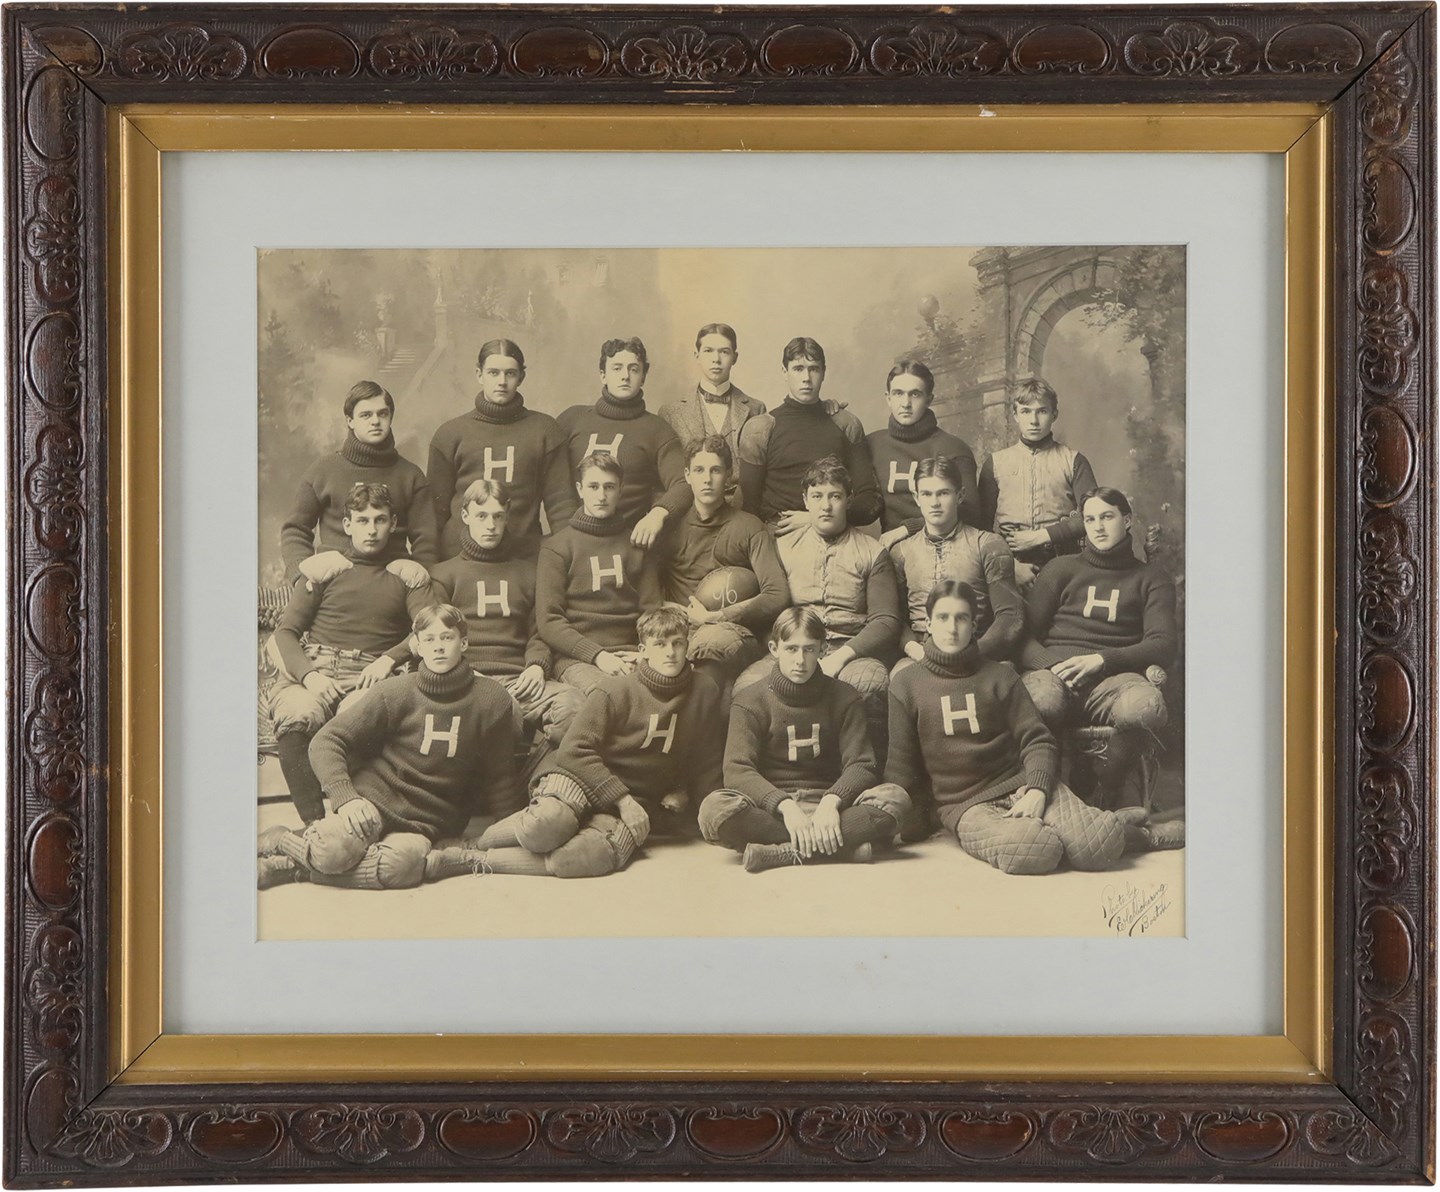 Vintage Sports Photographs - 1896 Harvard Football Imperial Team Photograph by Elmer Chickering